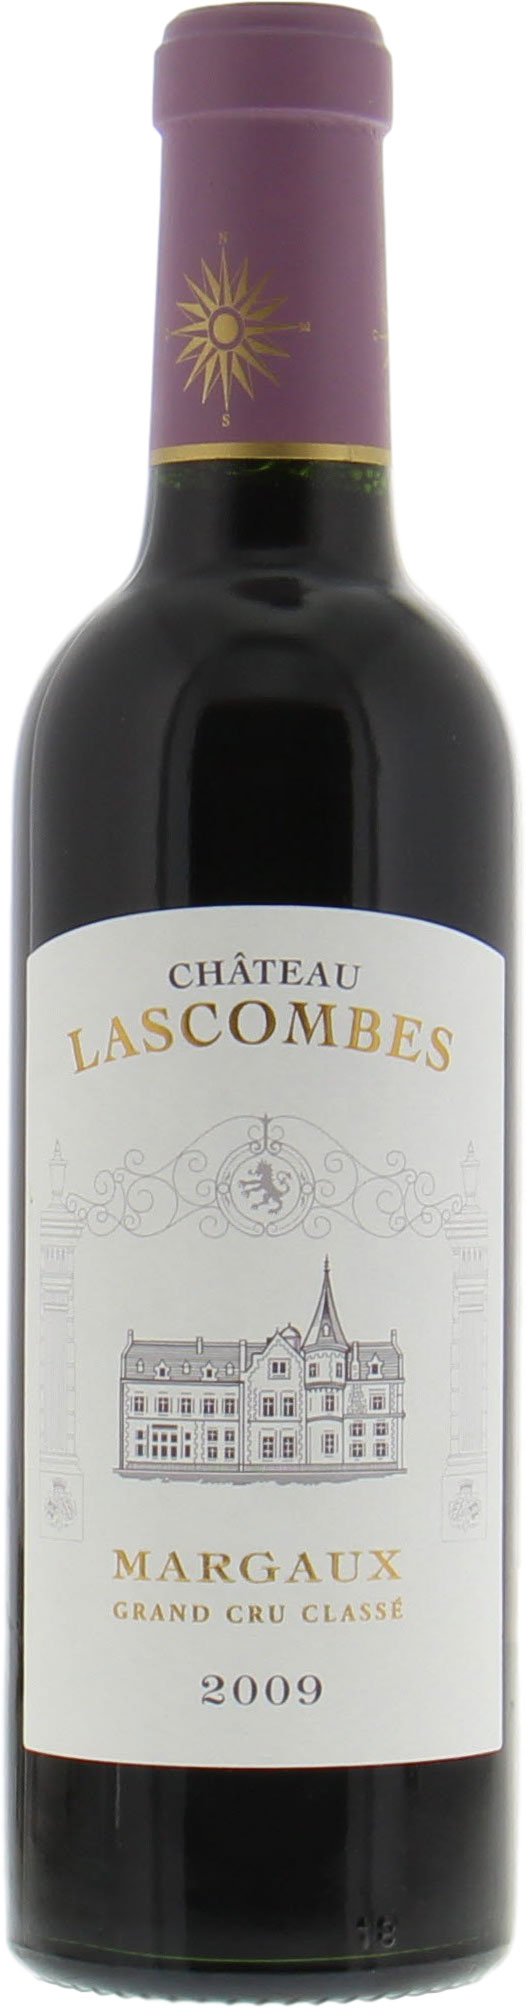 Chateau Lascombes - Chateau Lascombes 2009 From Original Wooden Case